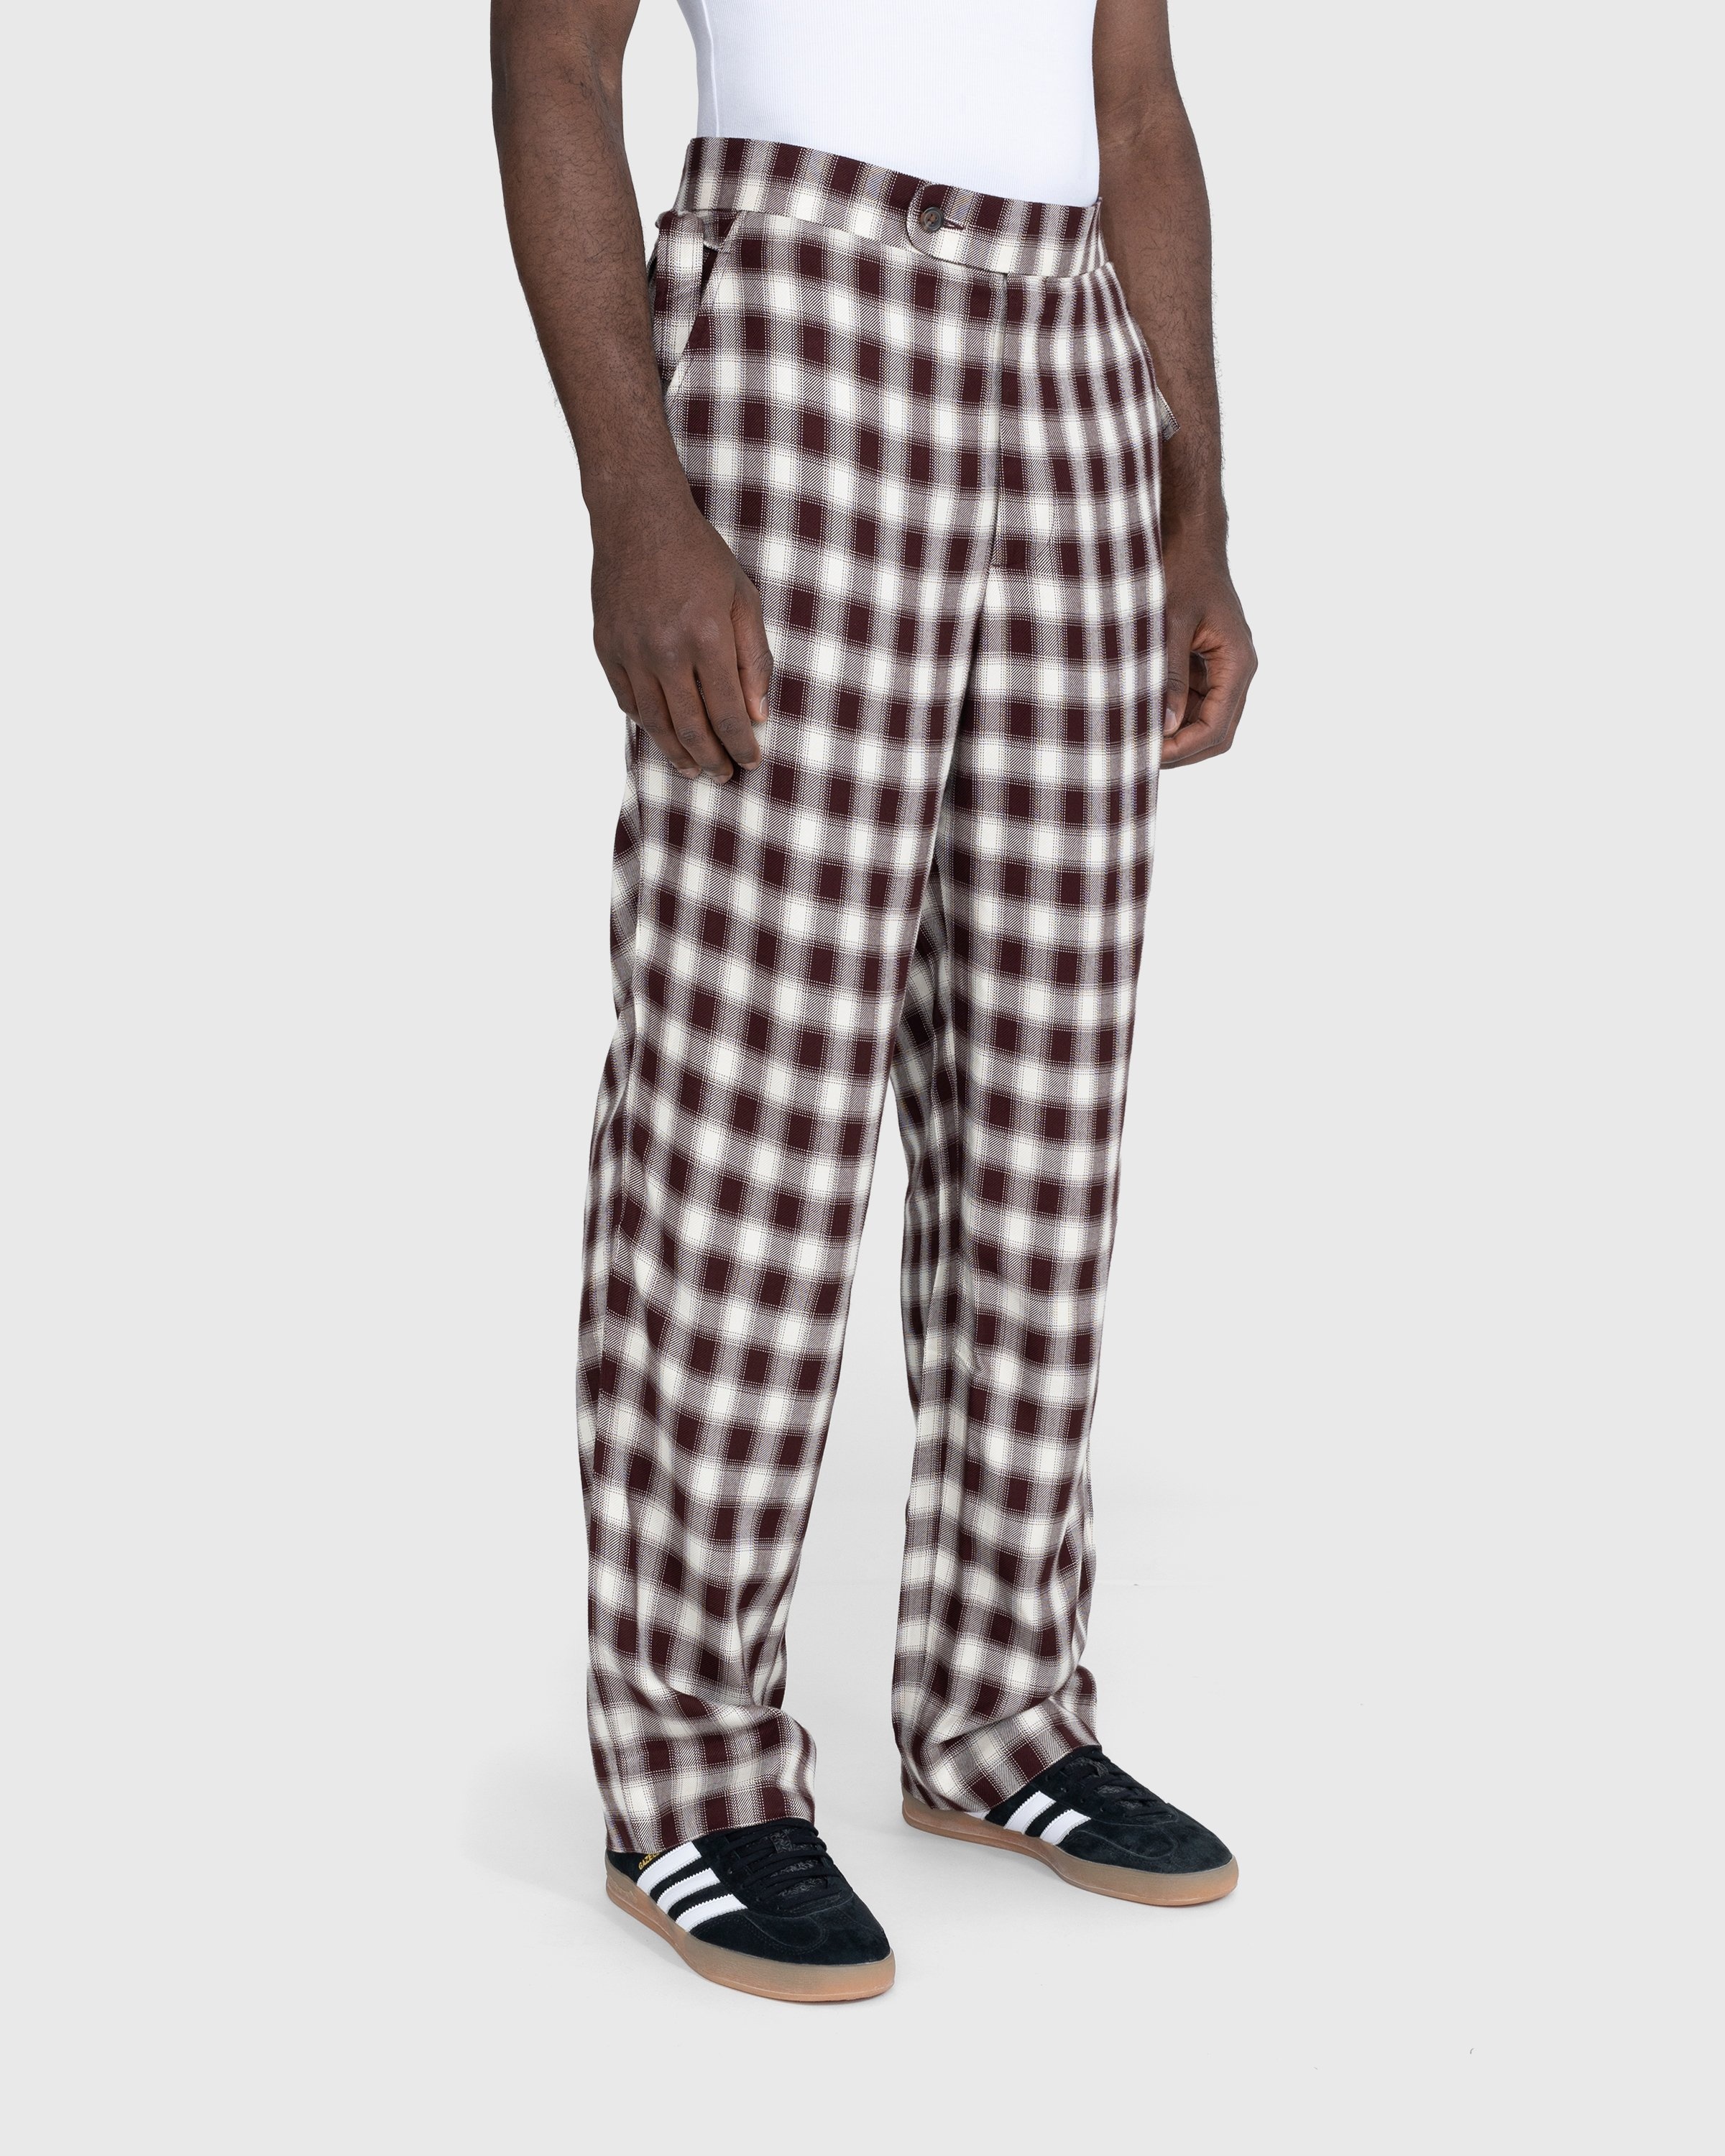 Bode – Shadow Plaid Side-Tie Trousers Brown - Trousers - Brown - Image 3